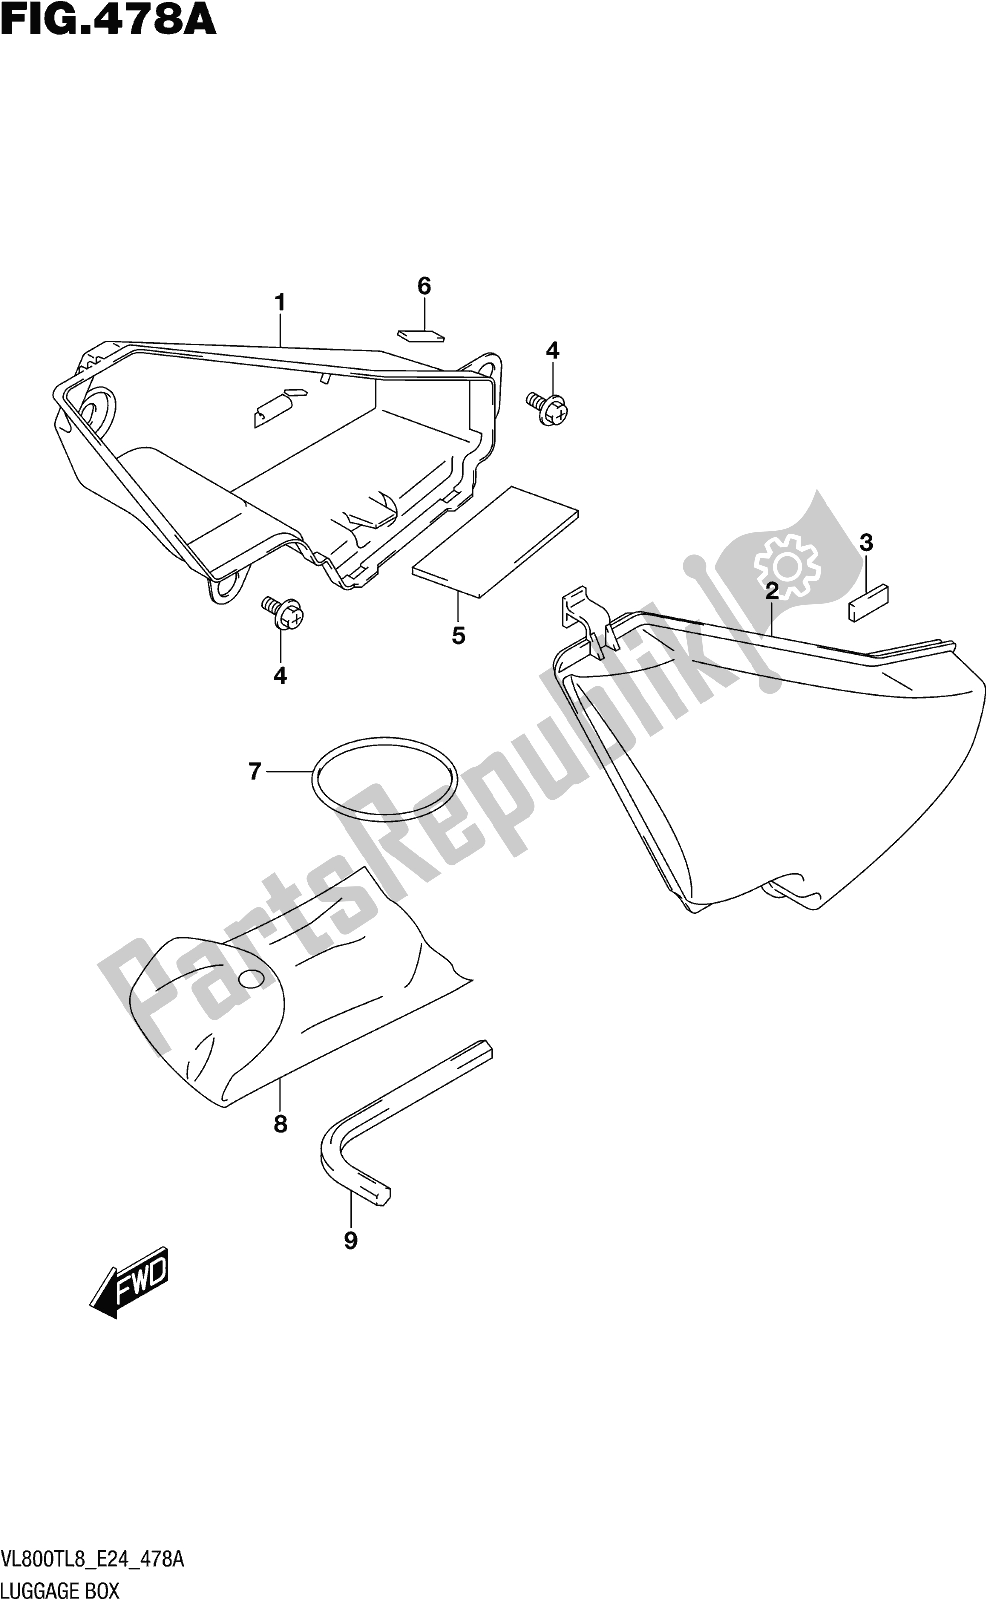 All parts for the Fig. 478a Luggage Box of the Suzuki VL 800T 2018